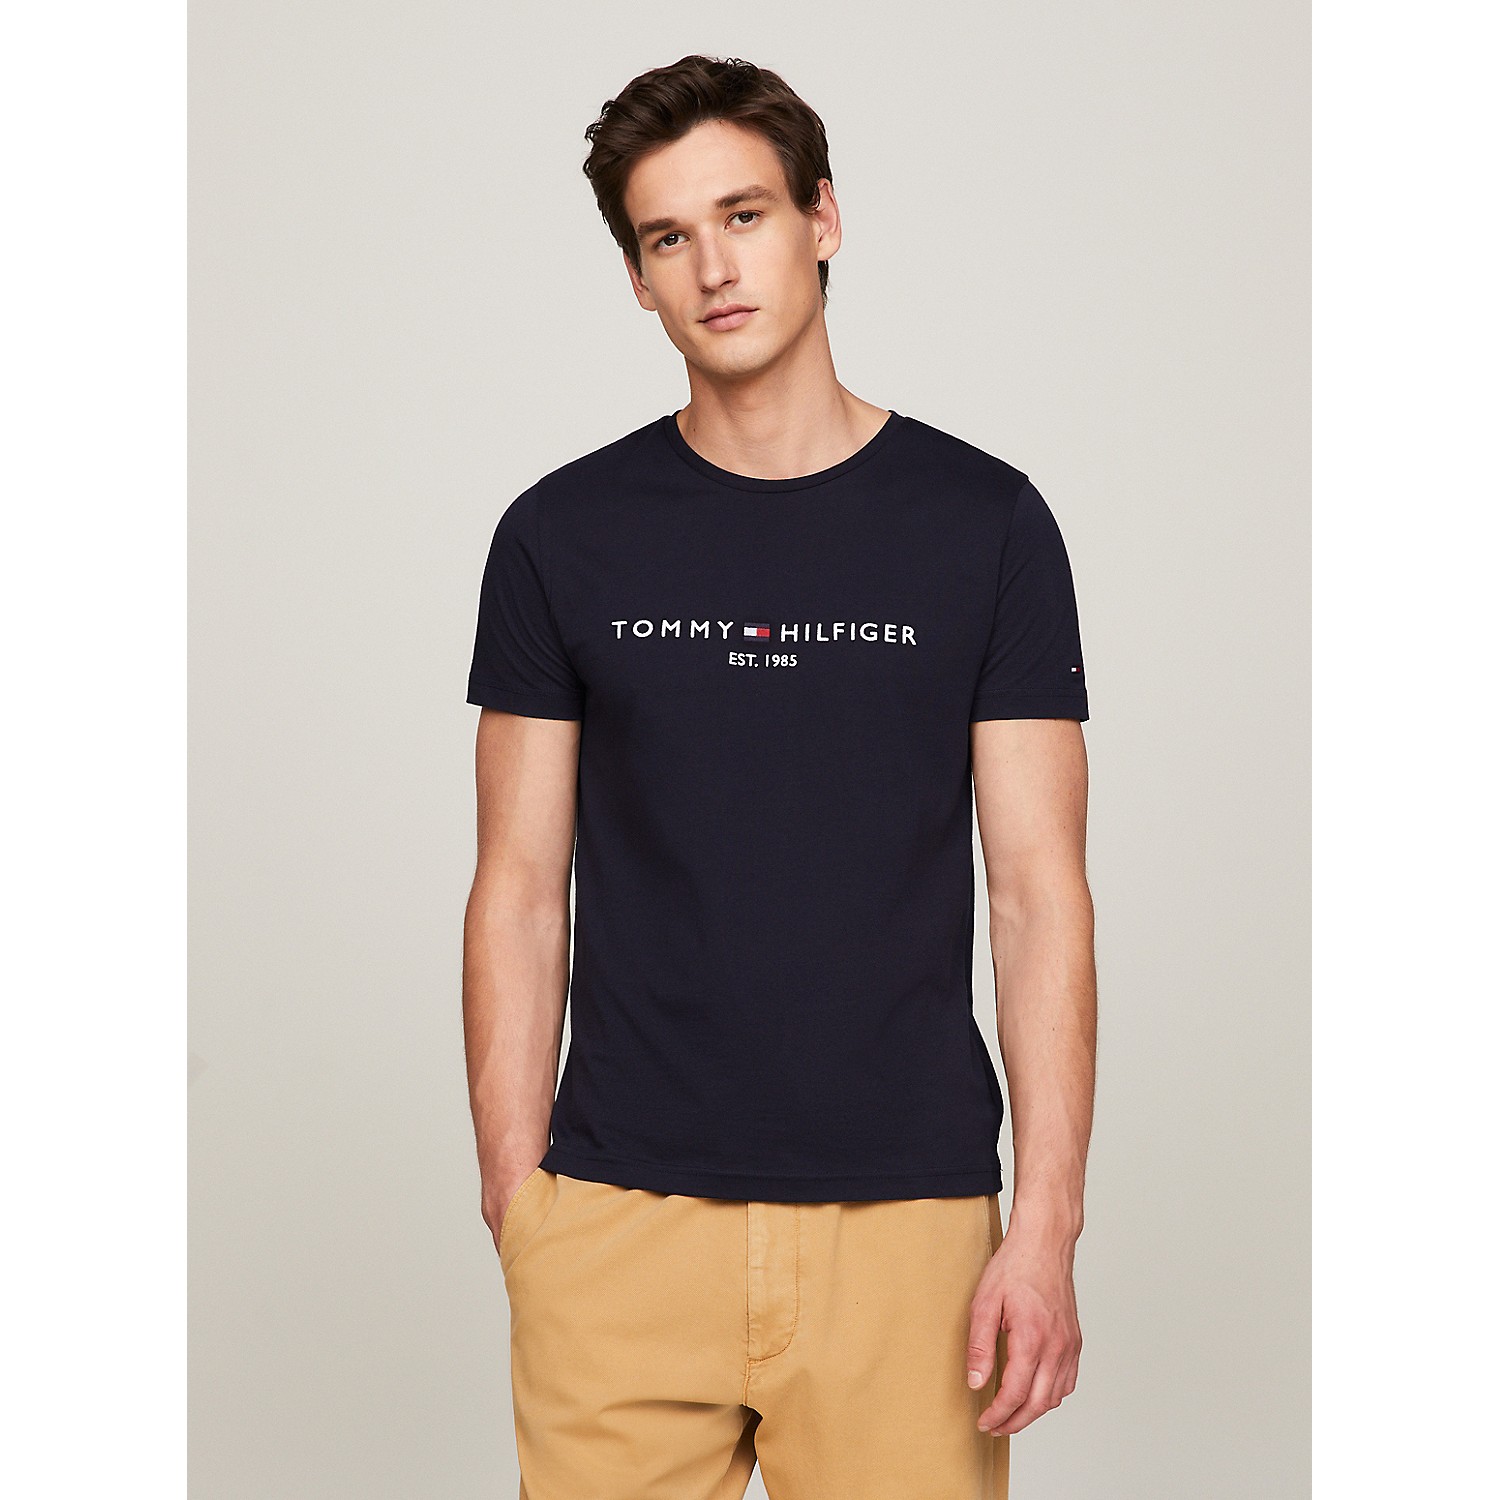 TOMMY HILFIGER Embroidered Tommy Logo T-Shirt